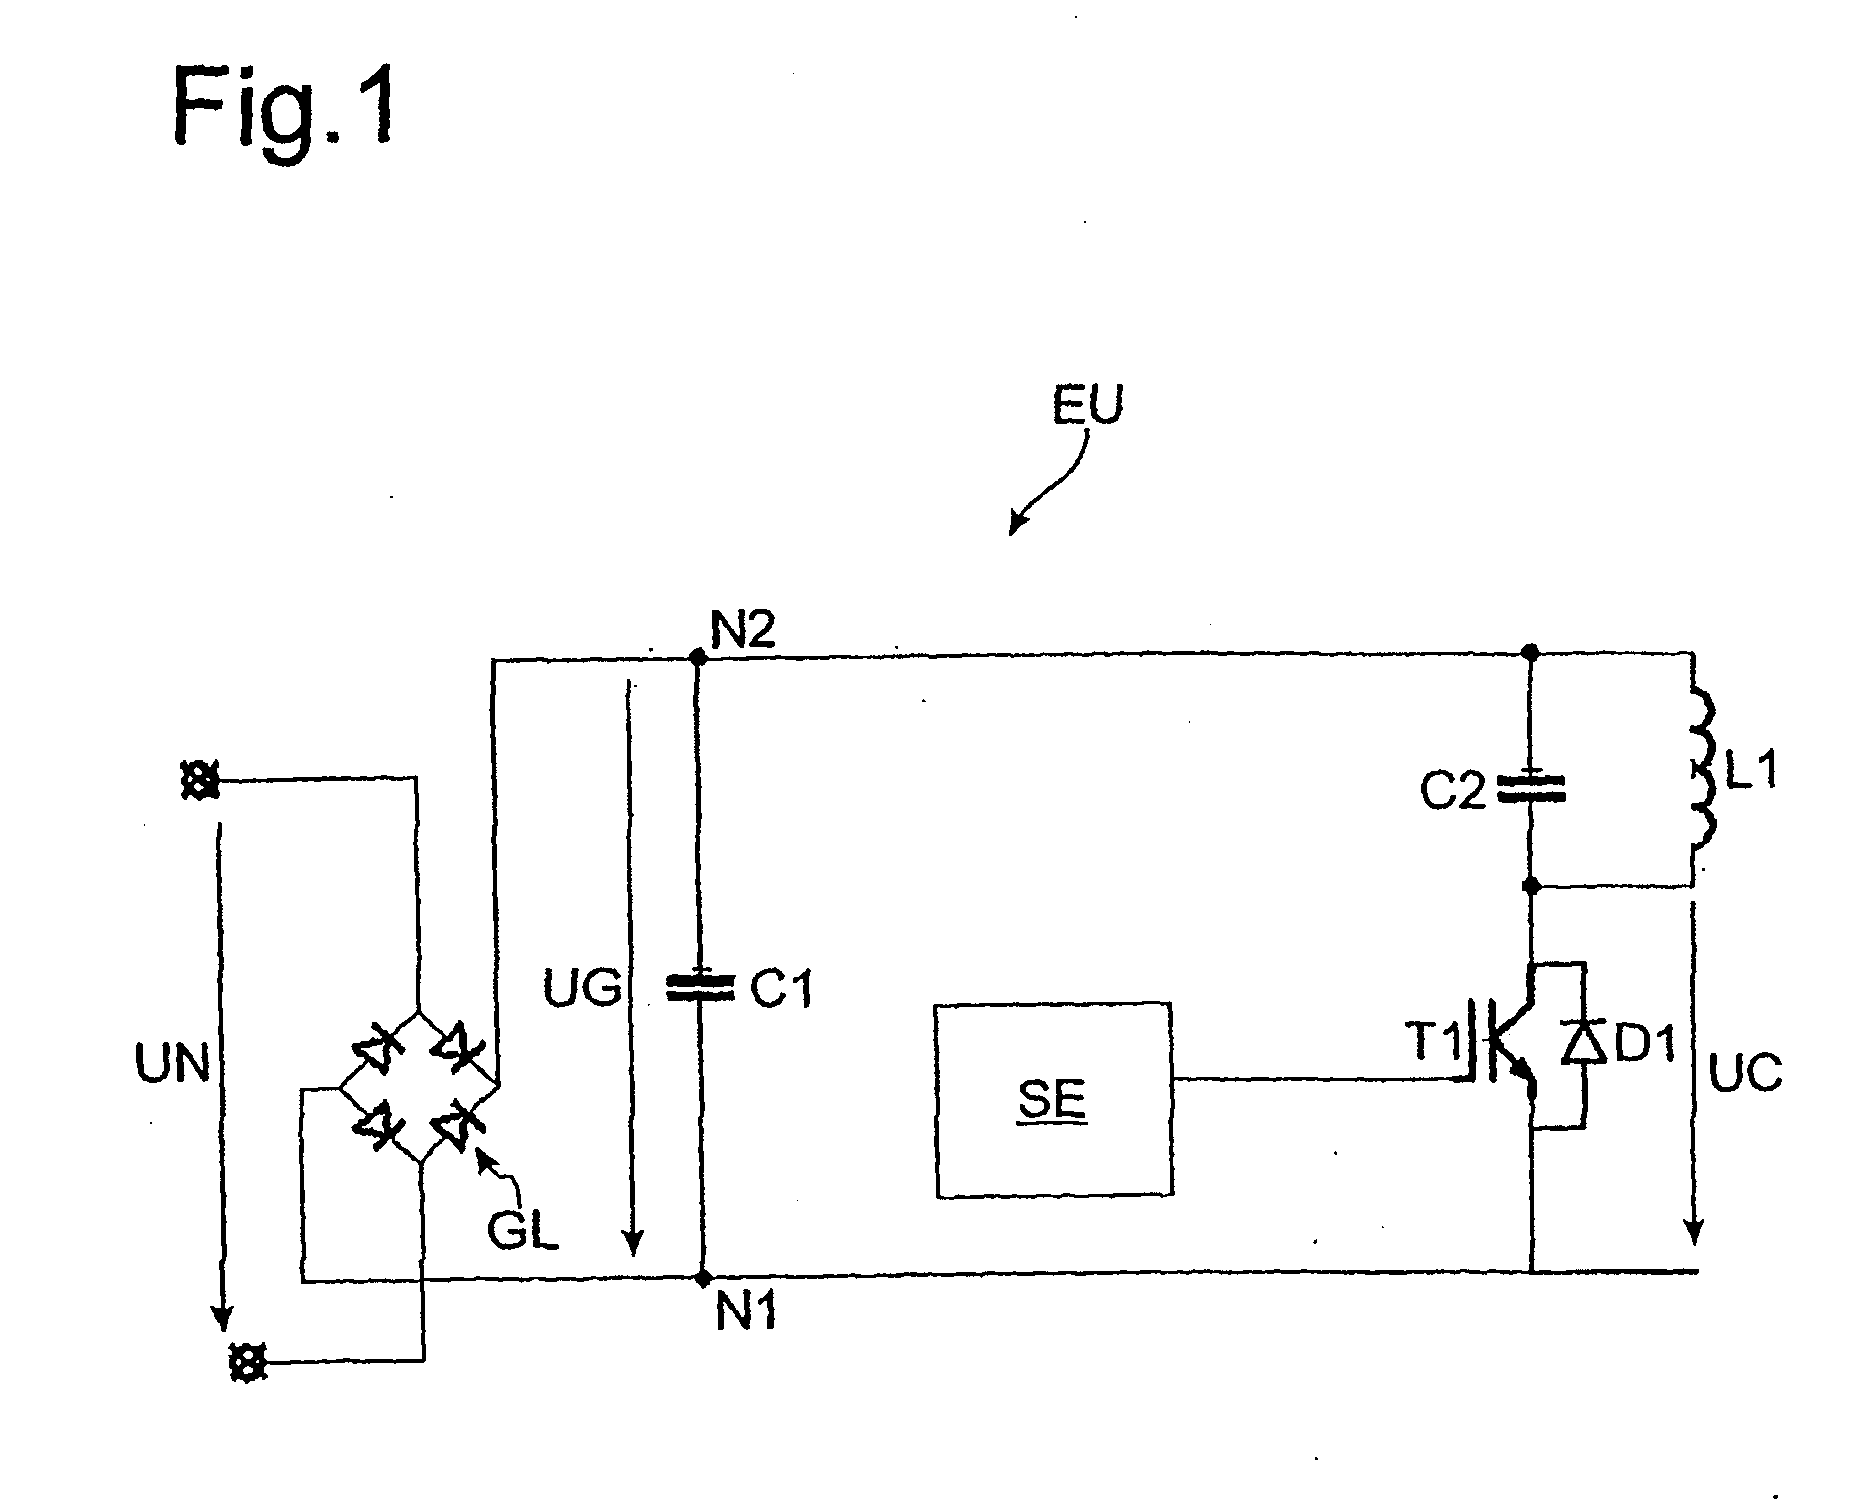 Method for operating an induction heating device